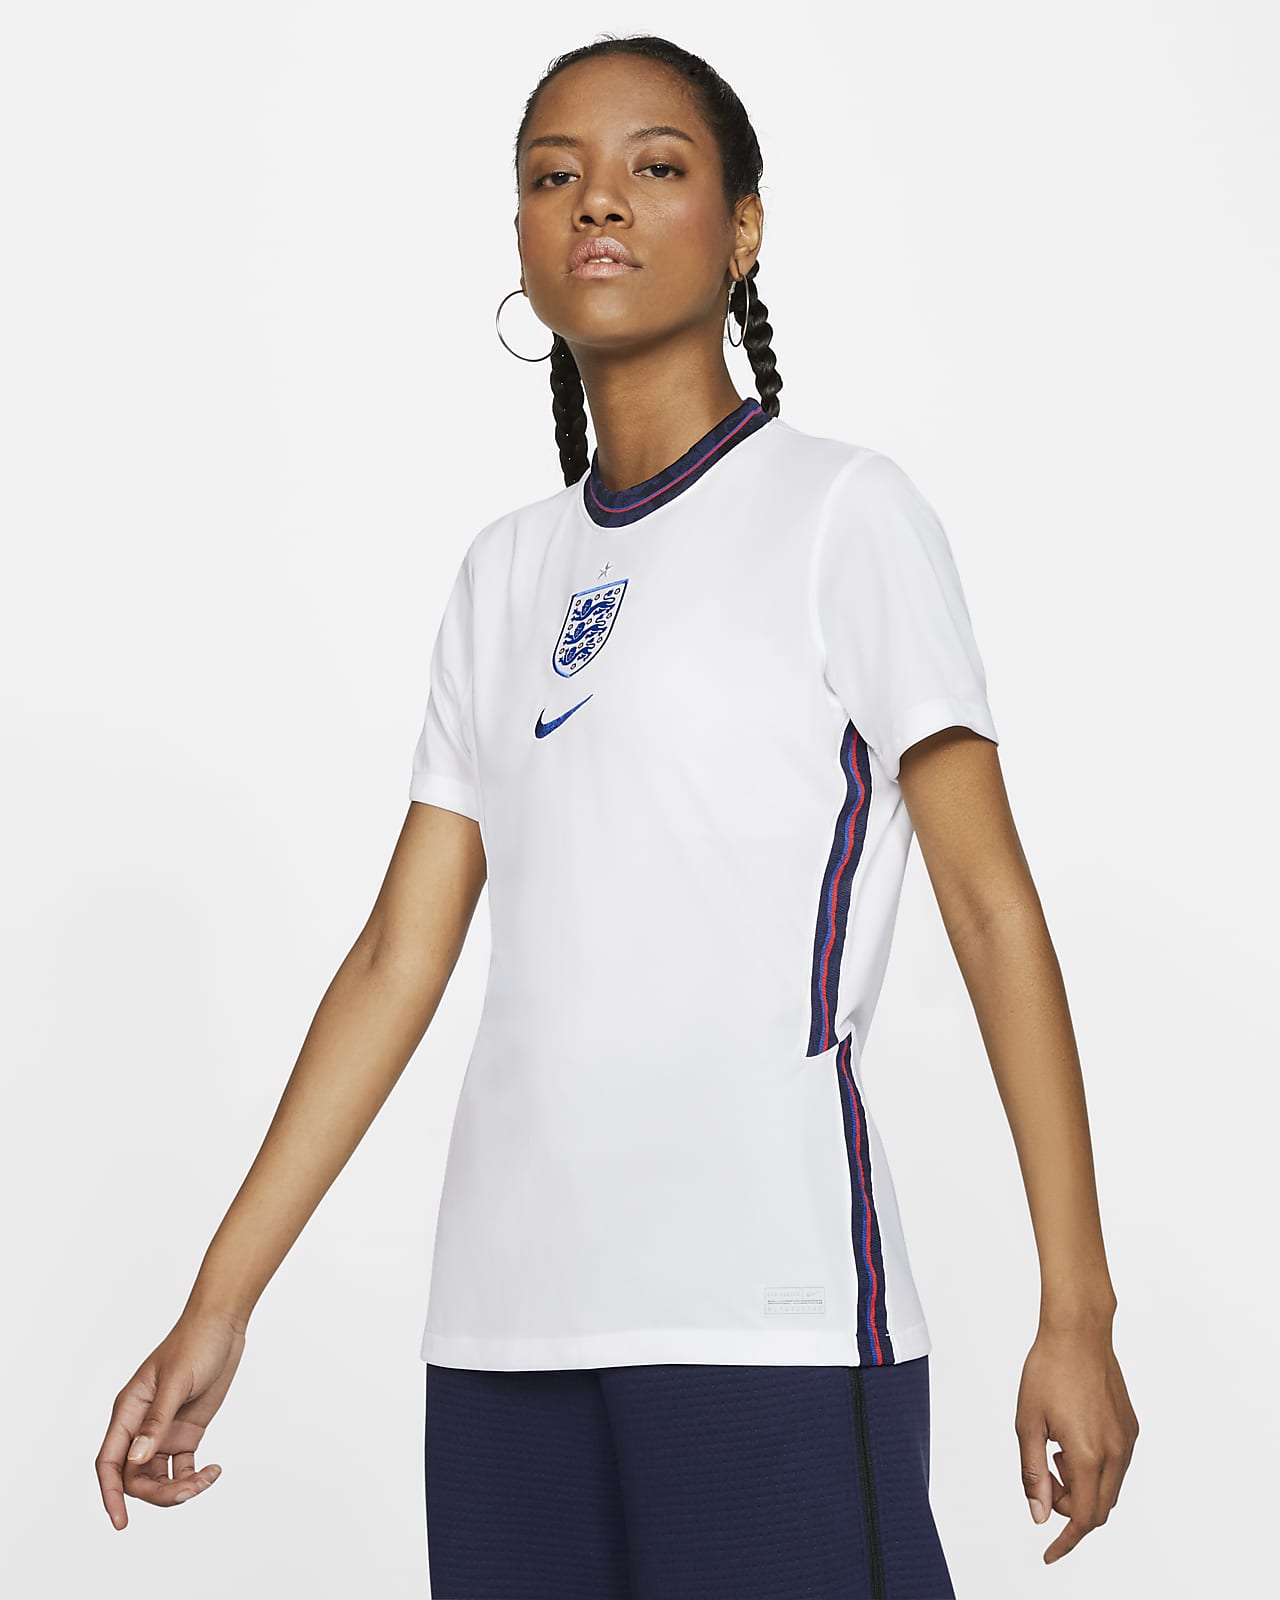 England Shirt : Nike England Euro 2020 Away Kit Released First Look At ...